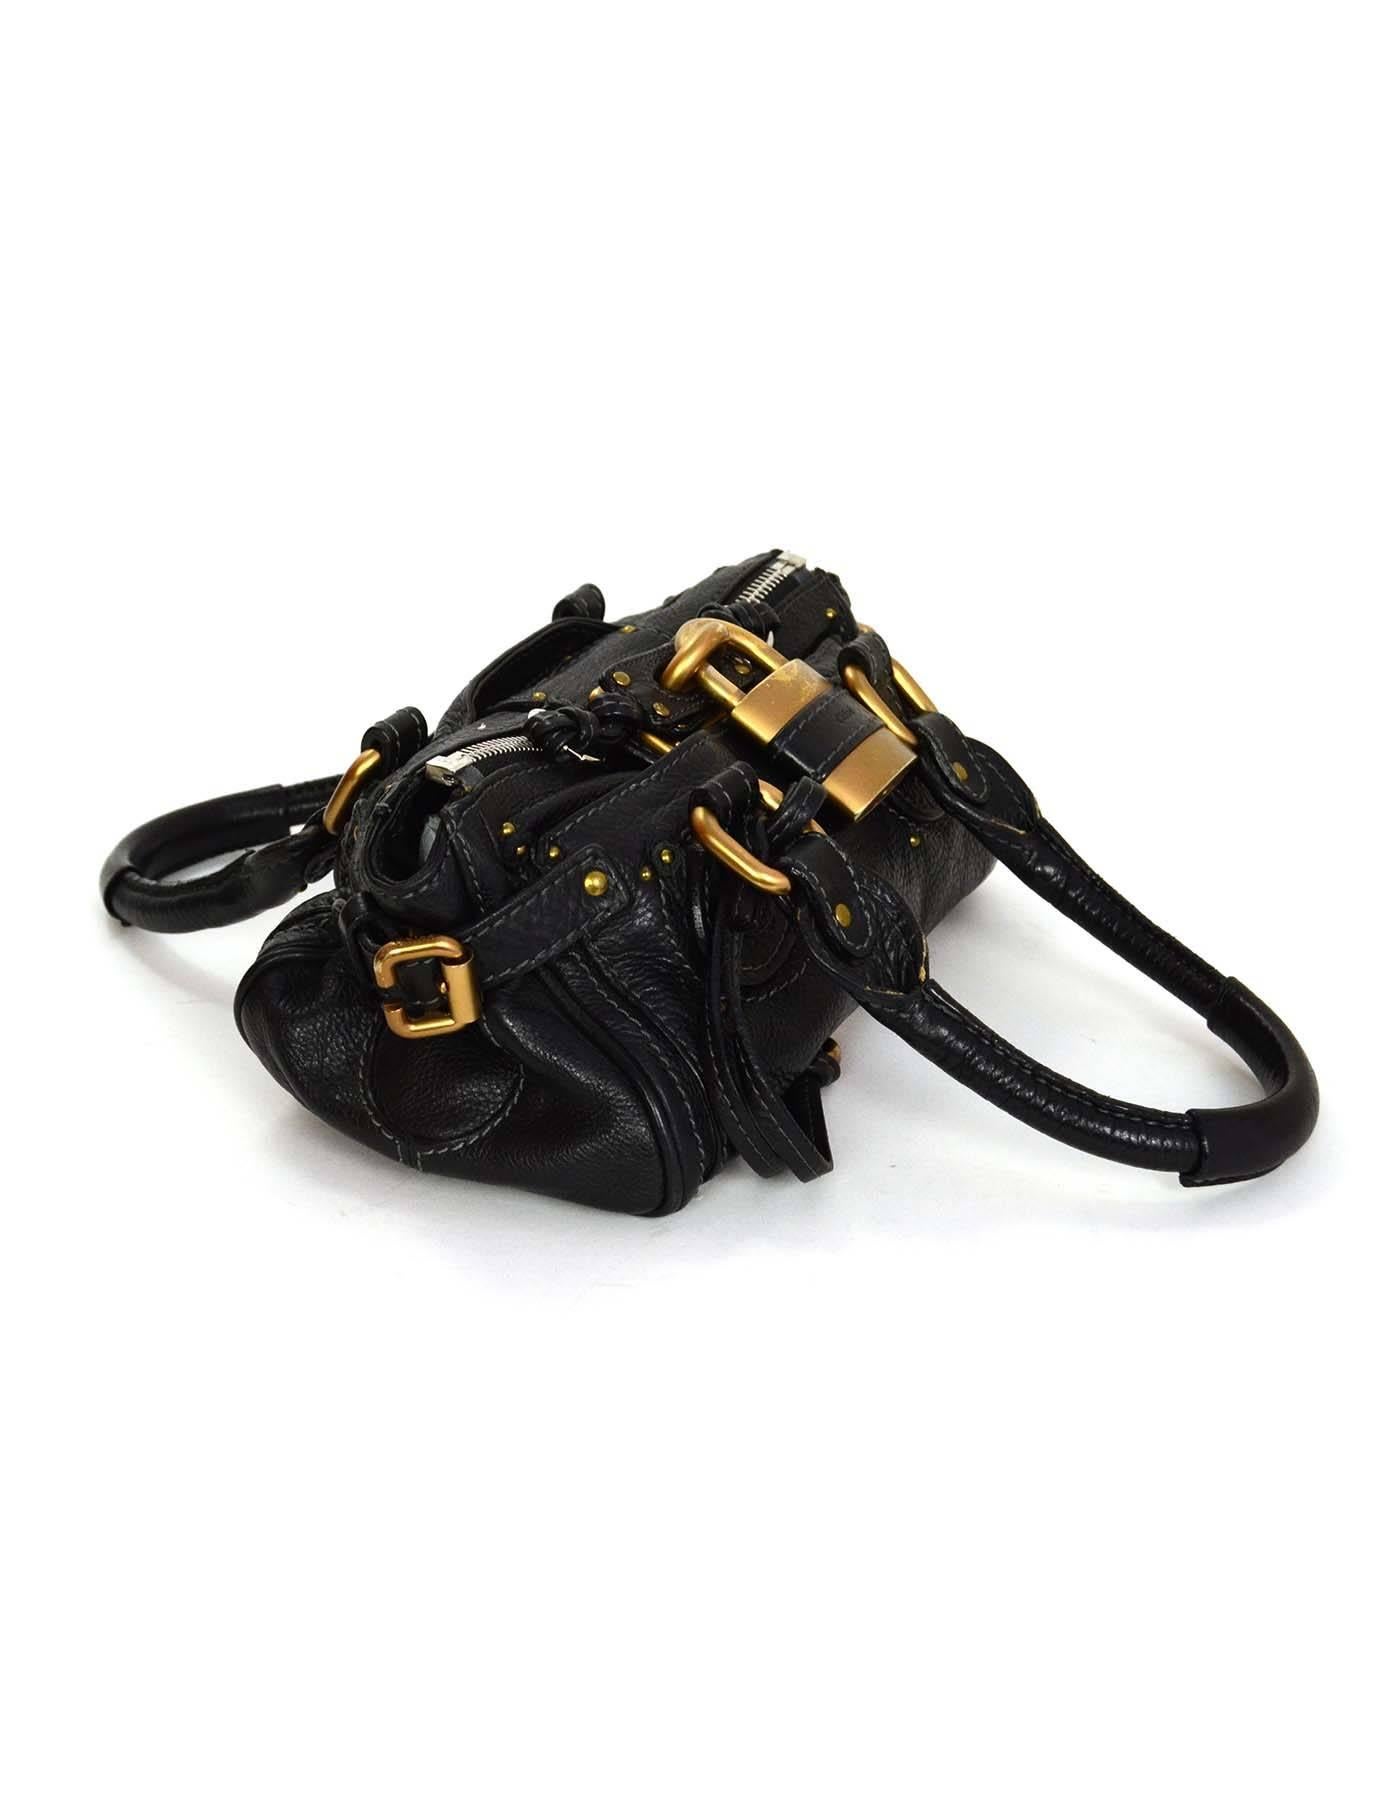 Chloe Black Leather Mini Paddington Bag 
Features oversized Chloe padlock 
Made In: Italy
Color: Black
Hardware: Goldtone and silvertone
Materials: Leather
Lining: Black canvas
Closure/Opening: Dual sided zipper closure that meet in middle